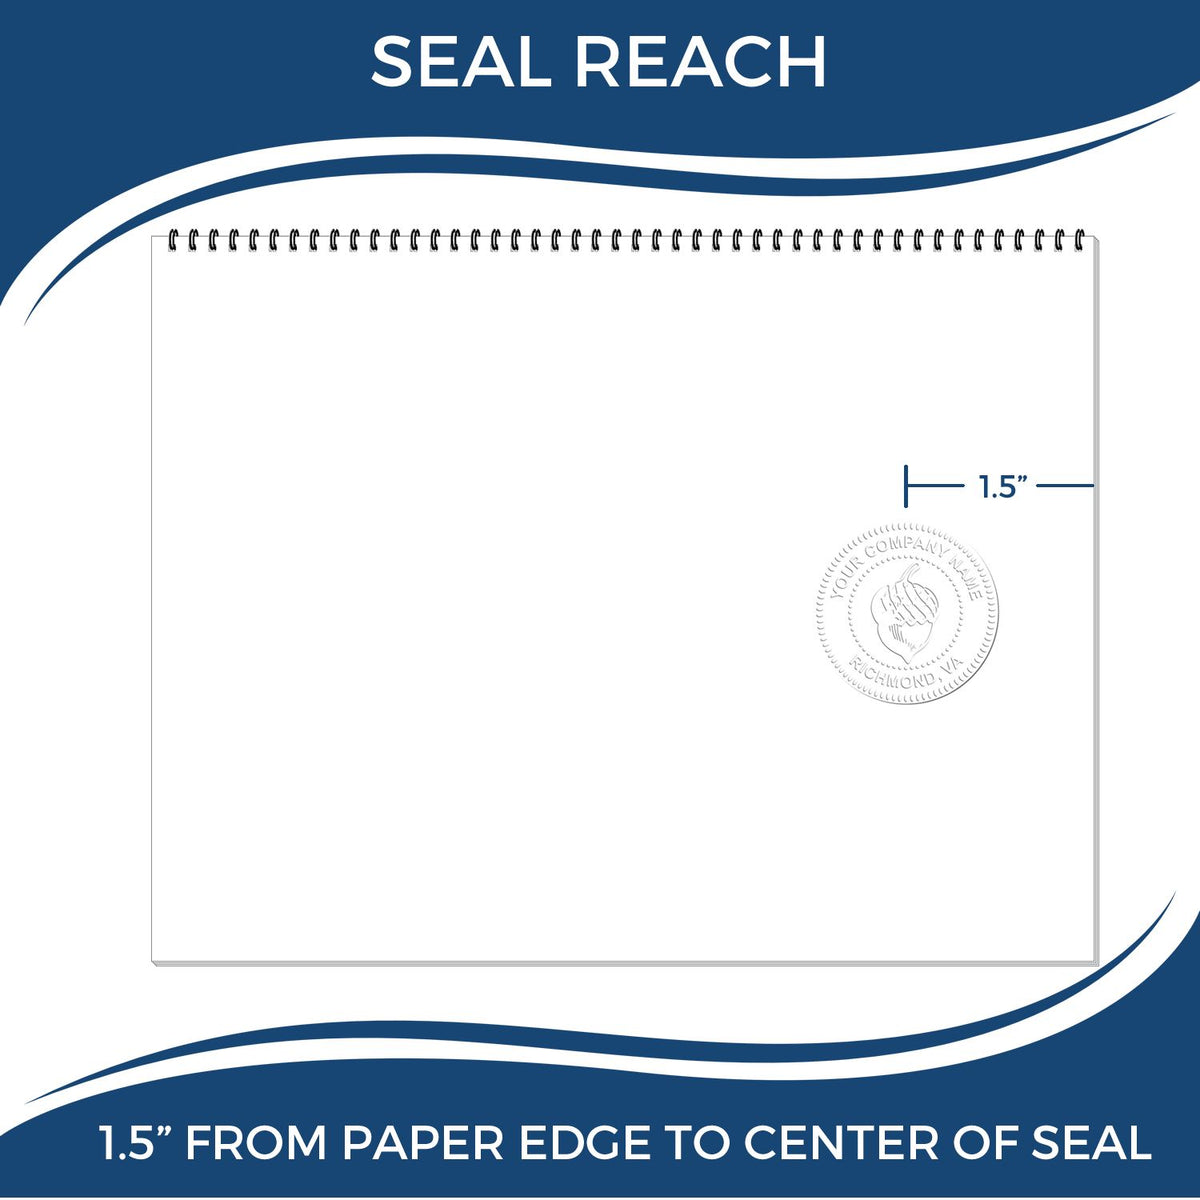 An infographic showing the seal reach which is represented by a ruler and a miniature seal image of the Idaho Desk Surveyor Seal Embosser